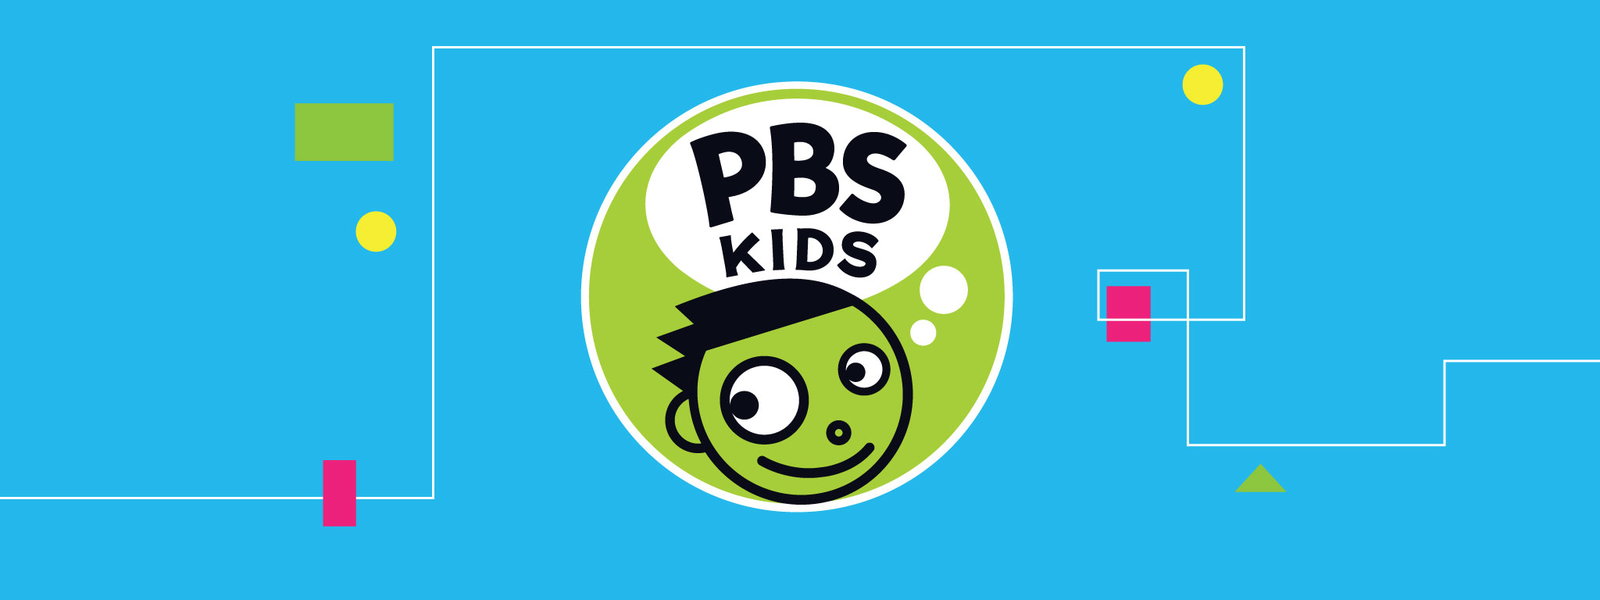 PBS Kids channel with on-demand service